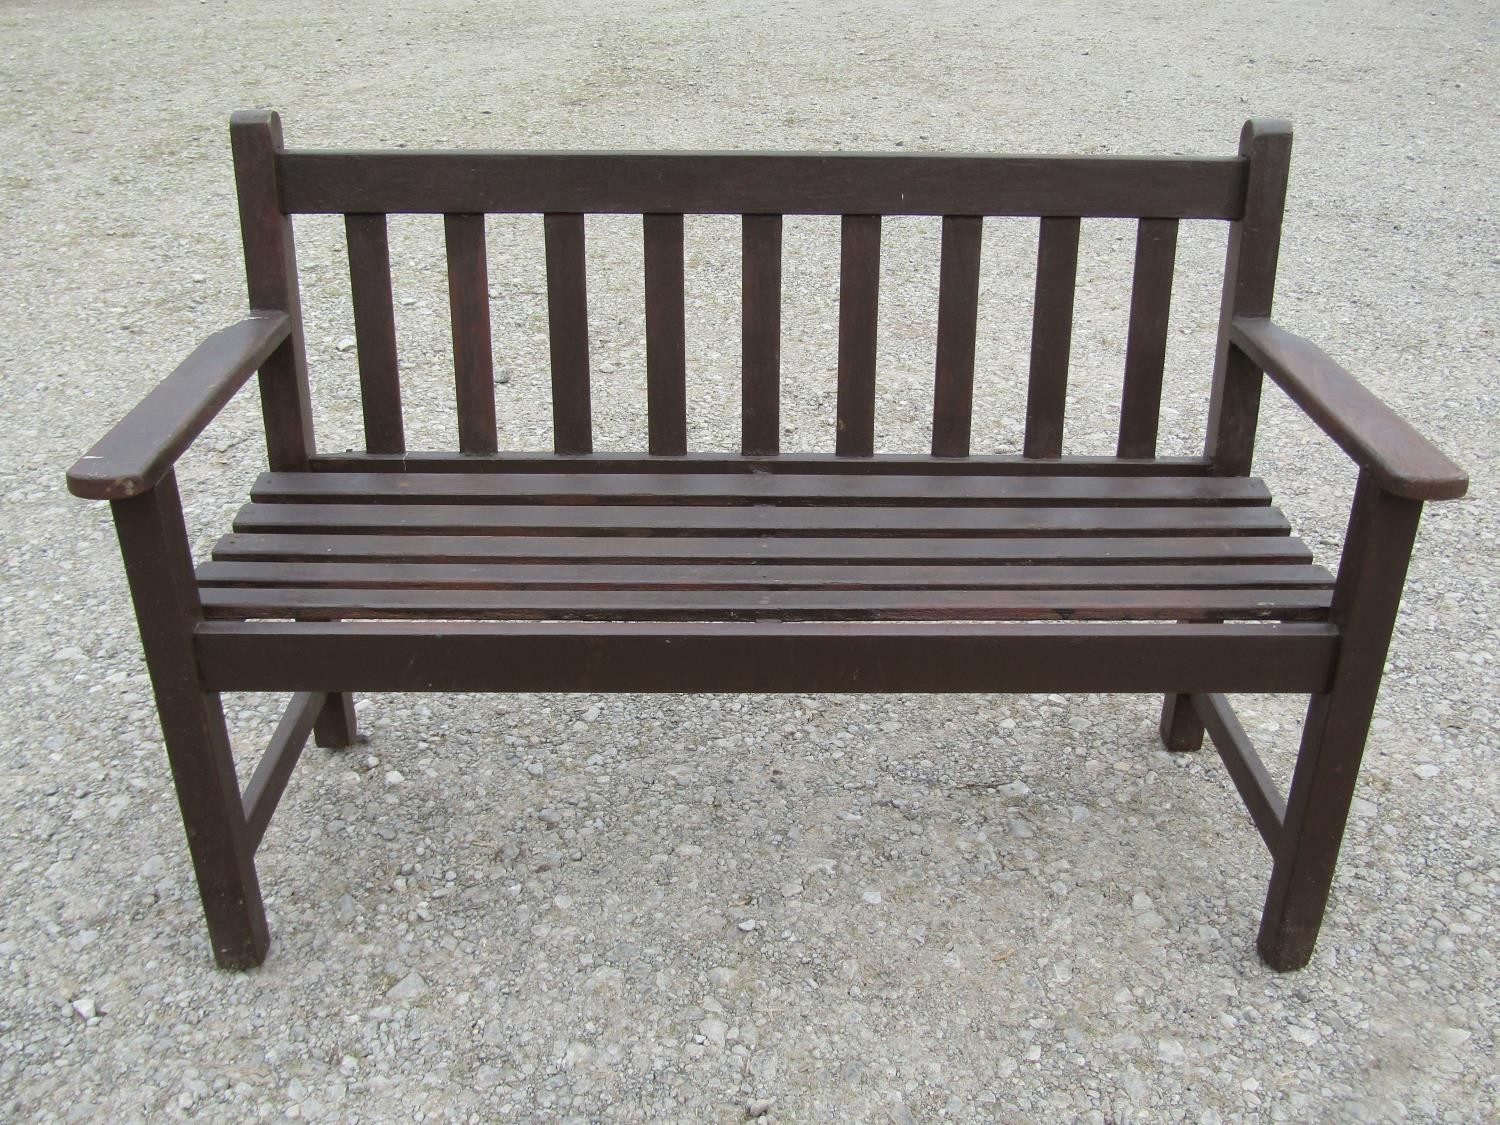 A Wrinch vintage stained teakwood two seat garden bench with slatted seat and back, 127 cm wide